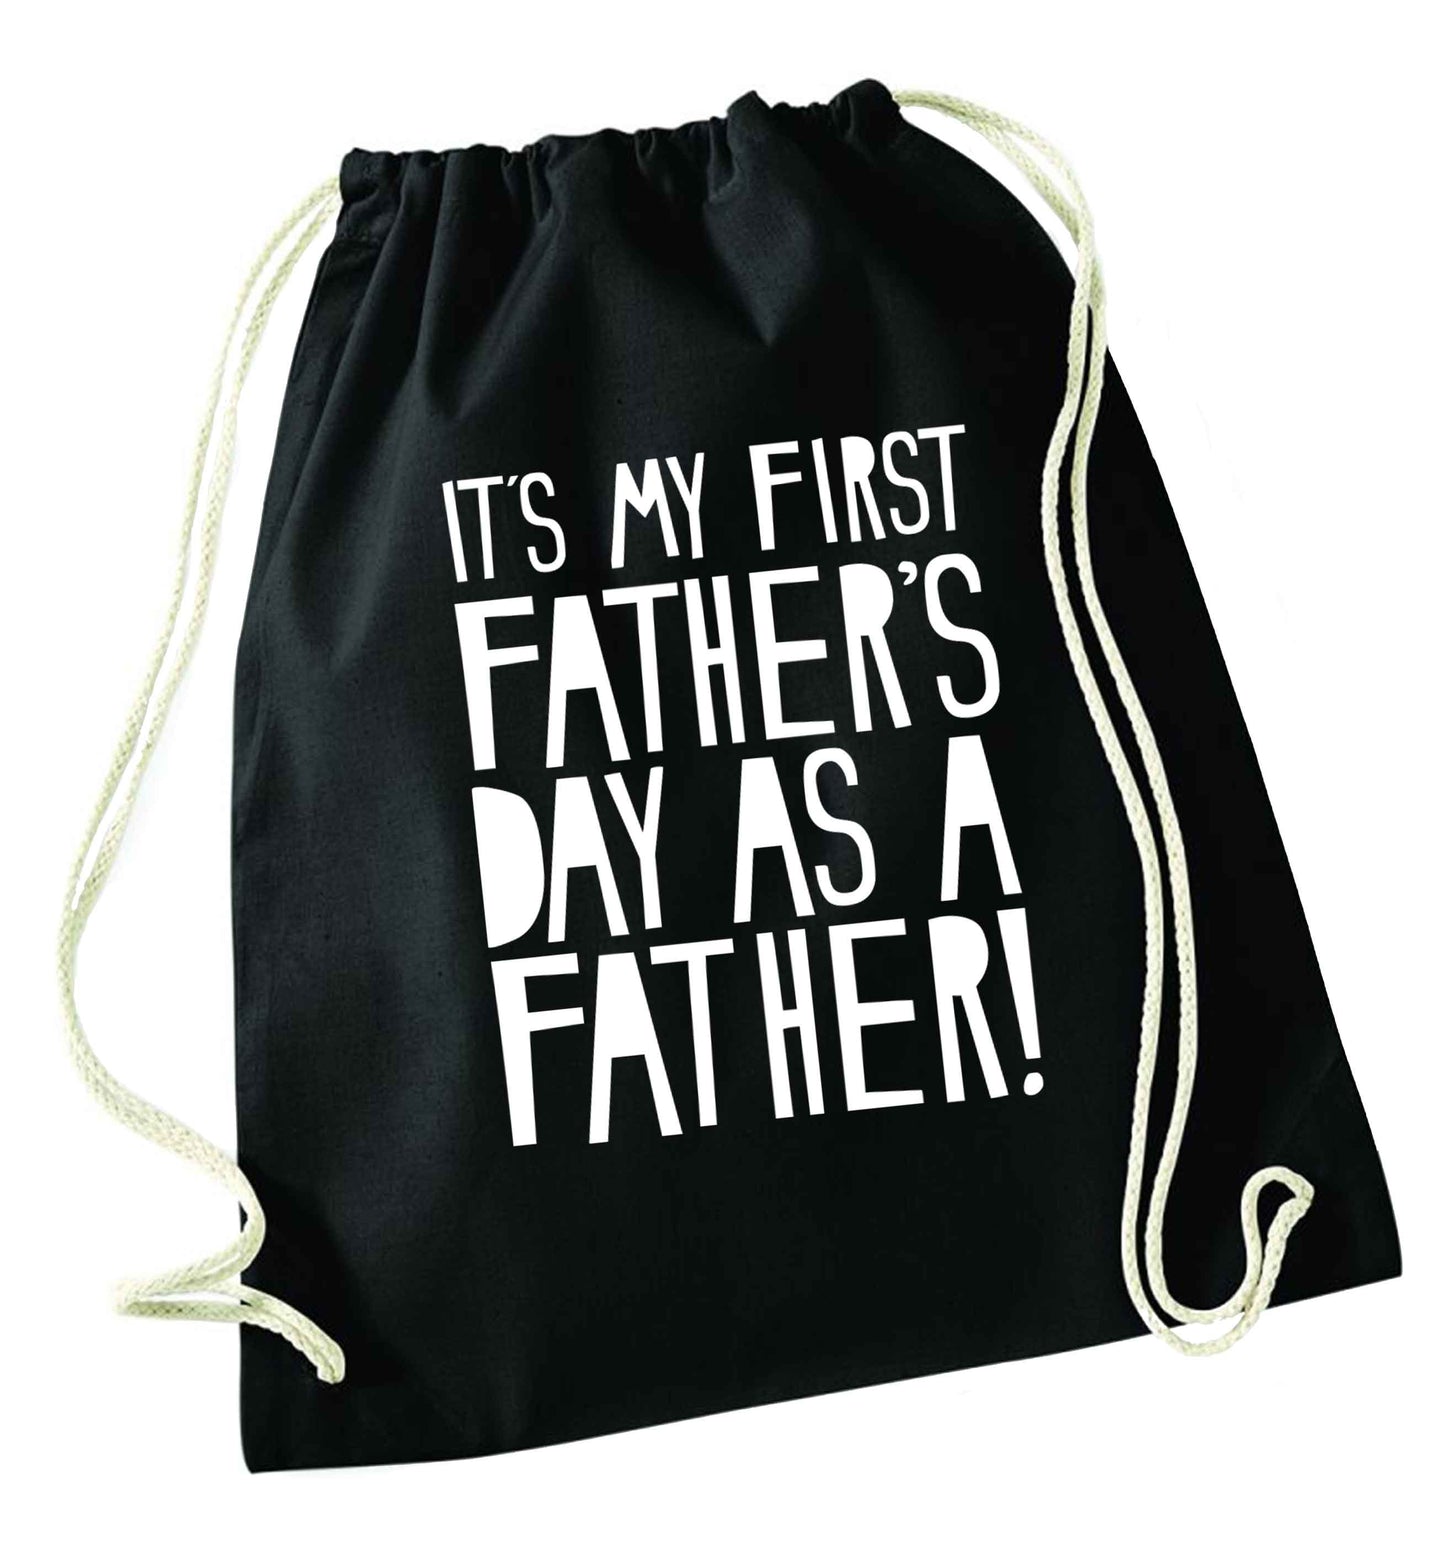 It's my first father's day as a father! black drawstring bag